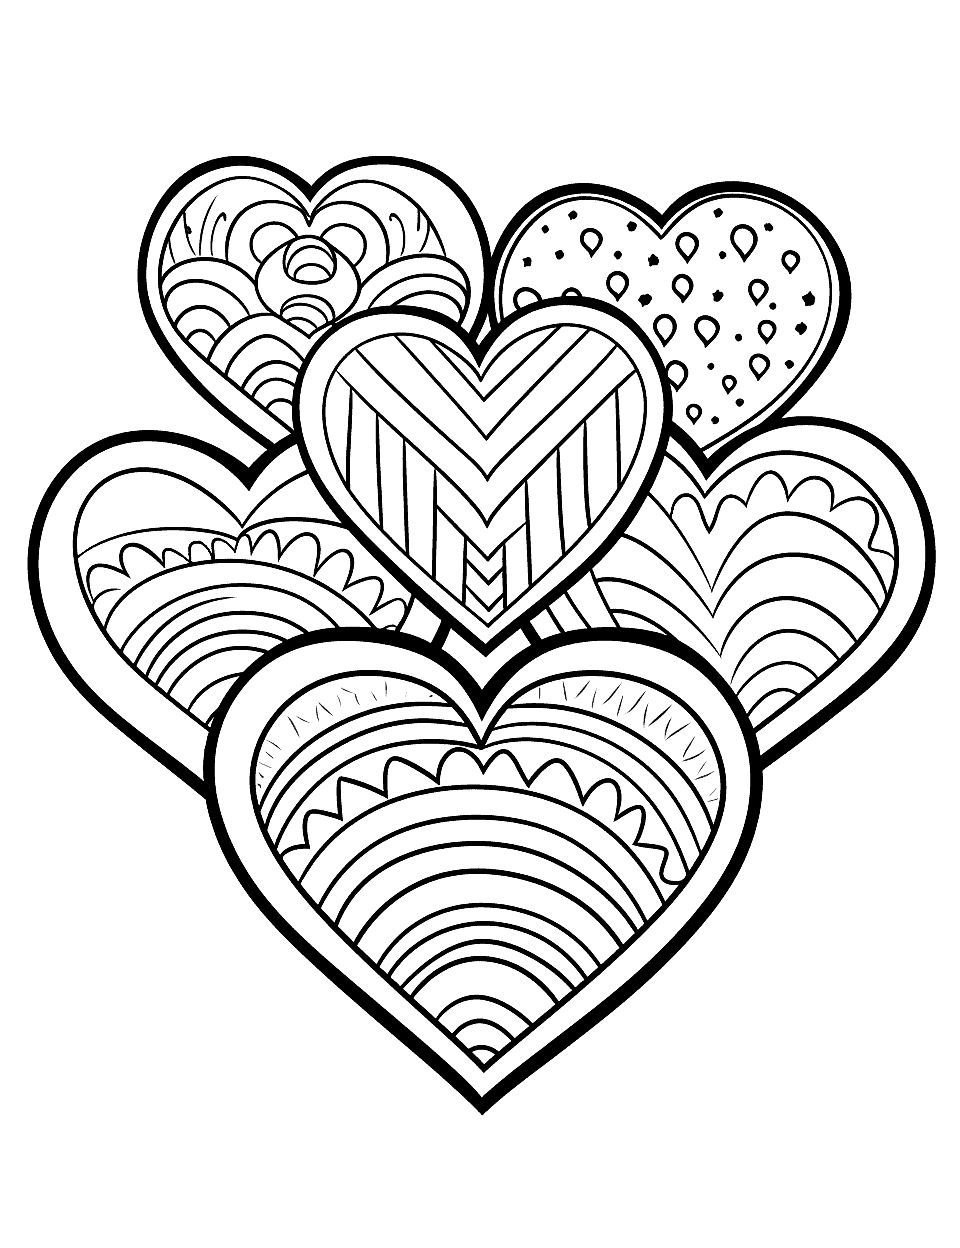 Heart-Shaped Cookies Heart Coloring Page - A coloring page of delicious heart-shaped cookies fresh out of the oven.